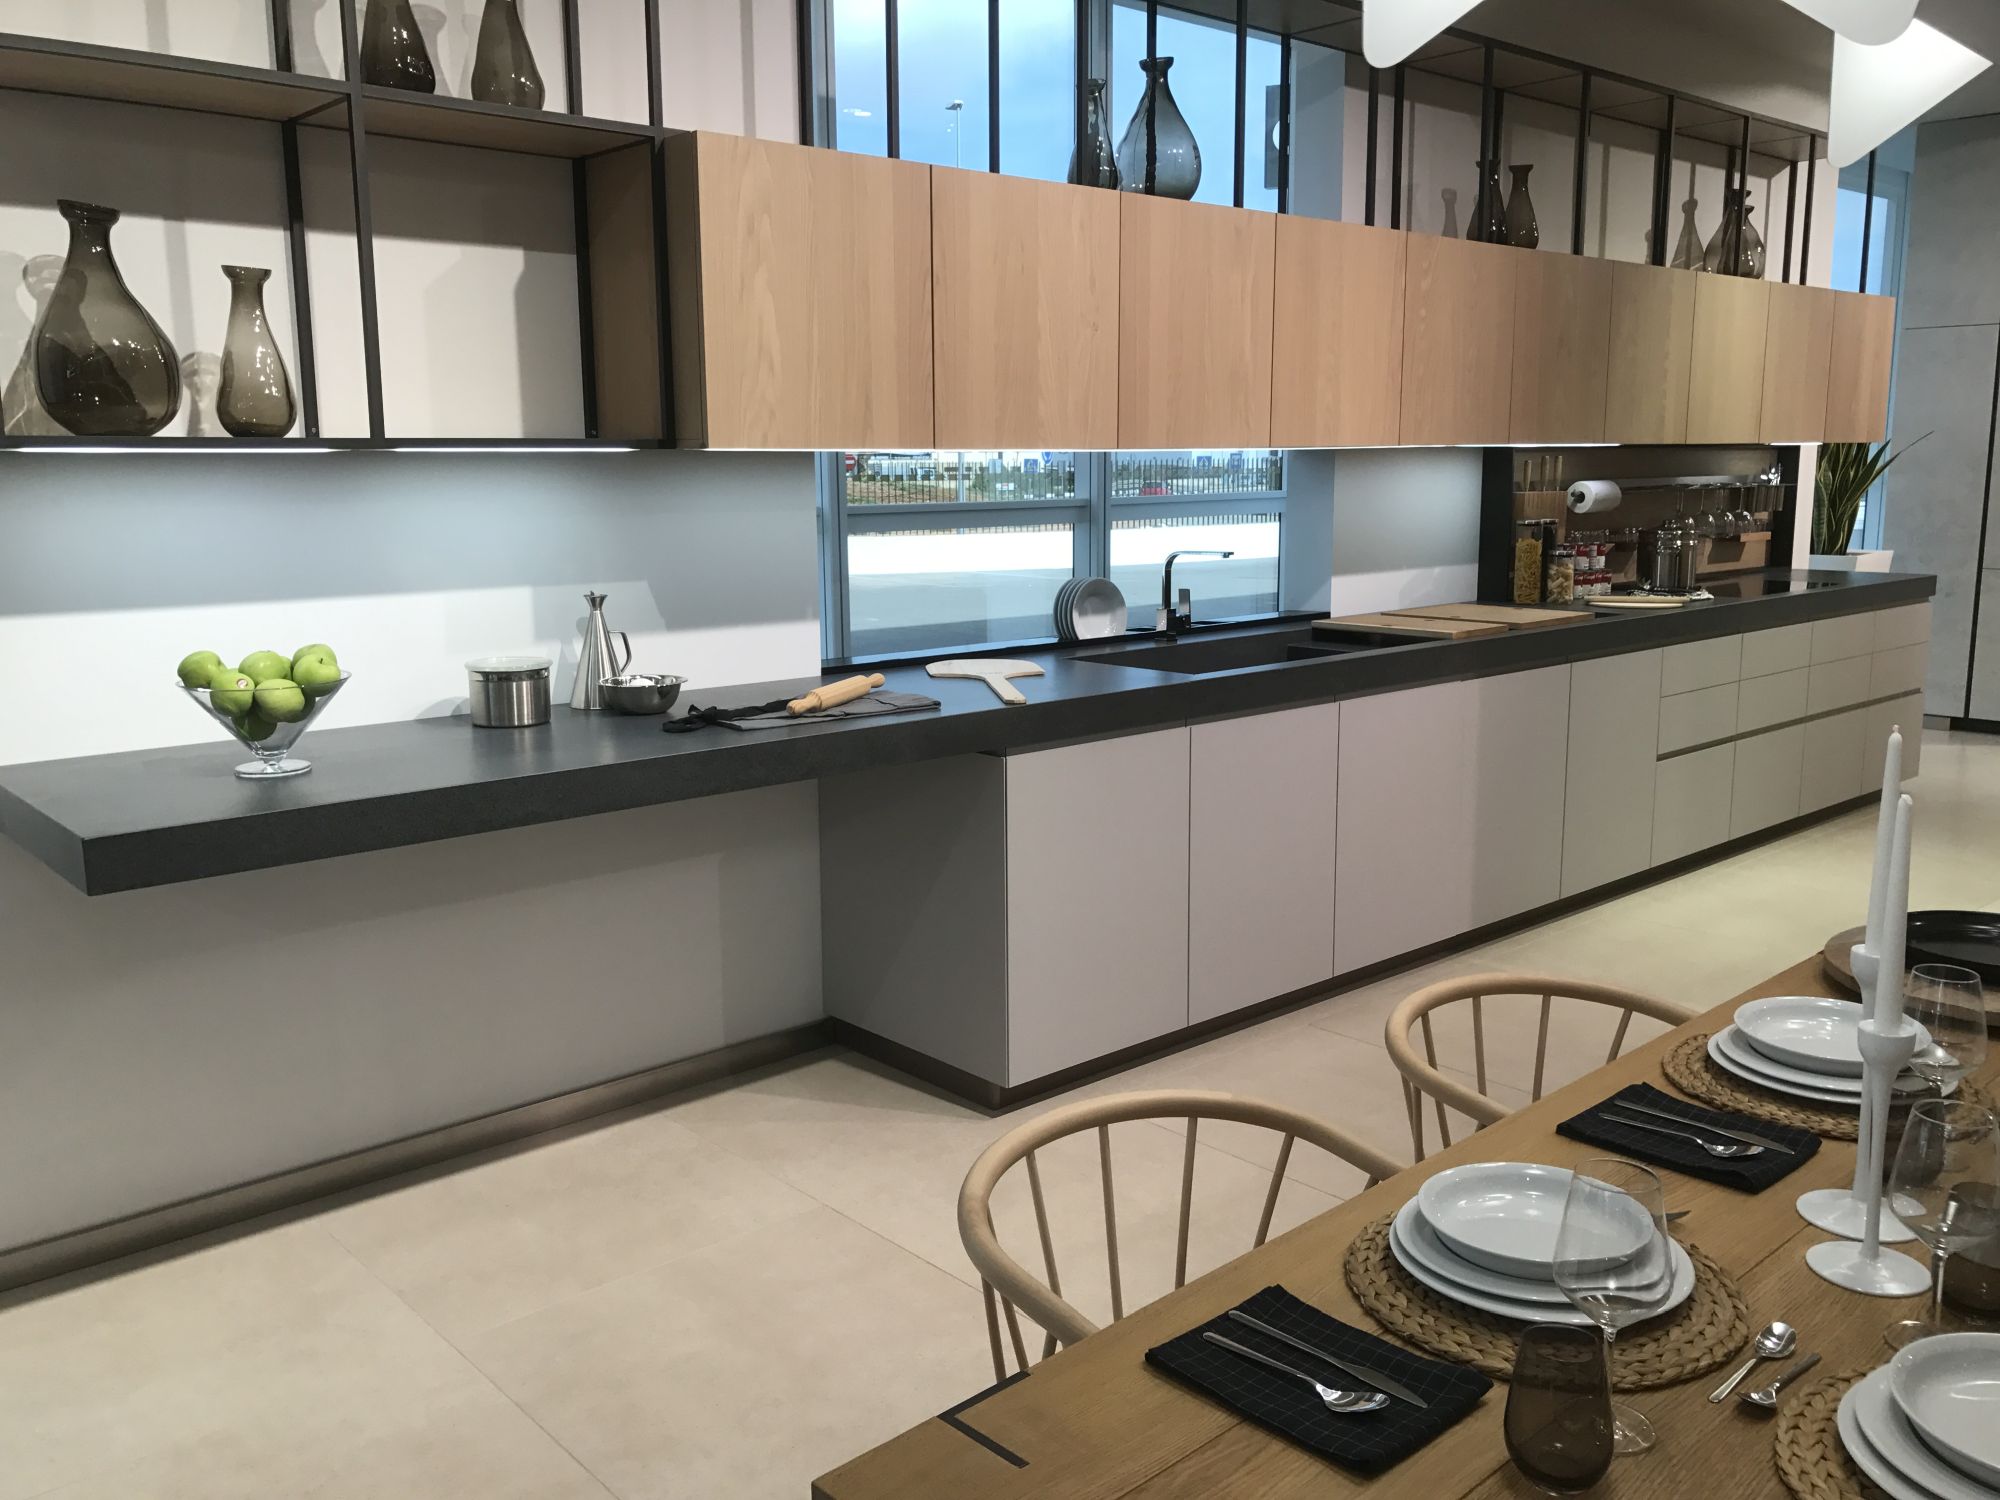 Large and bright kitchen with contemporary lines - GamaDecor